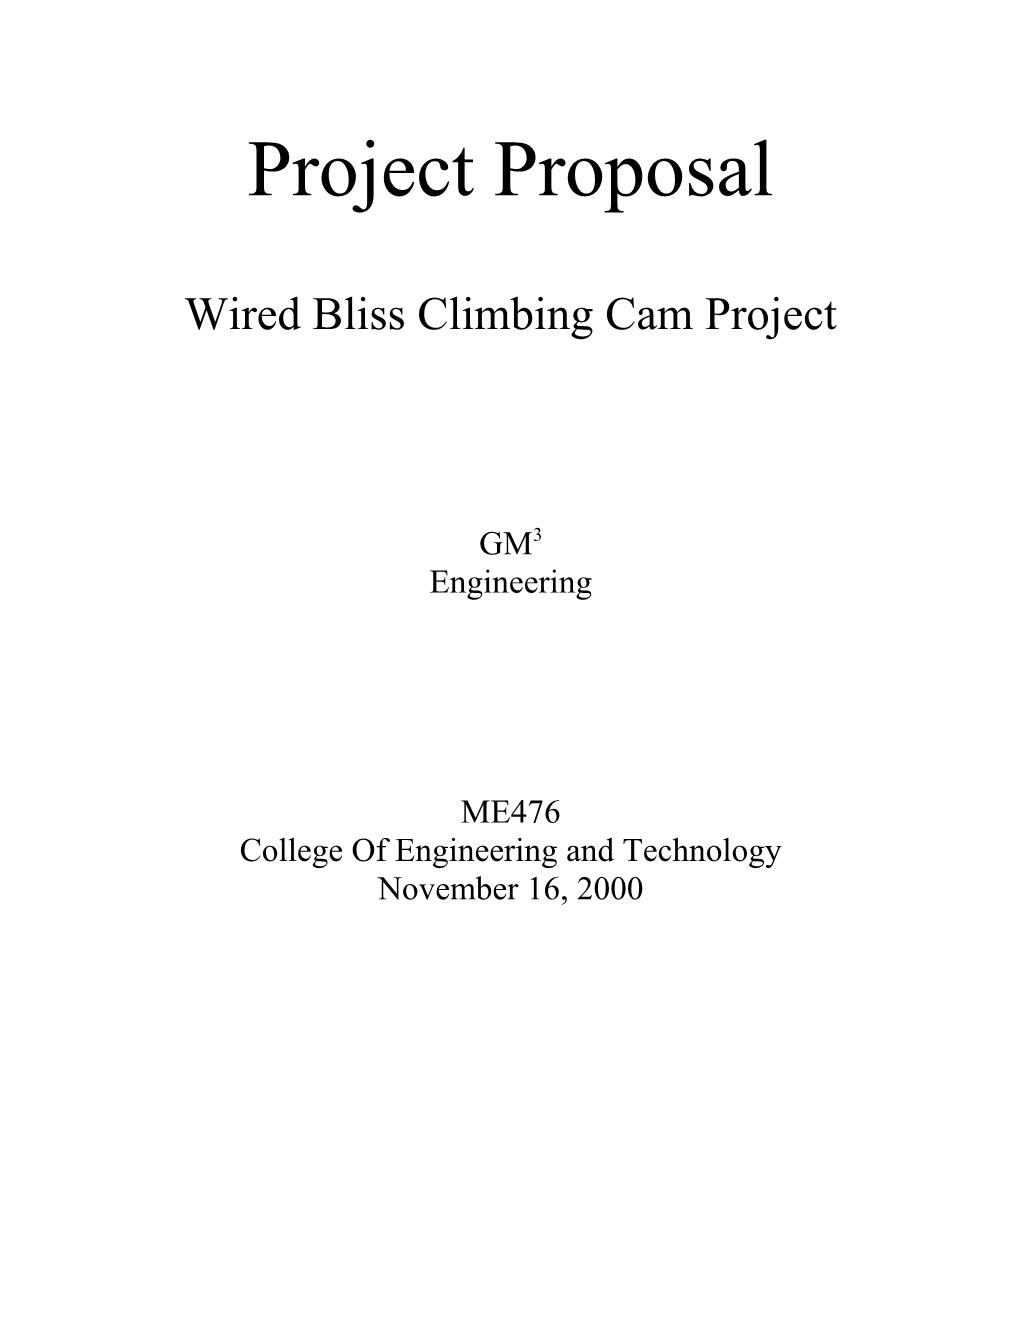 Wired Bliss Climbing Cam Project